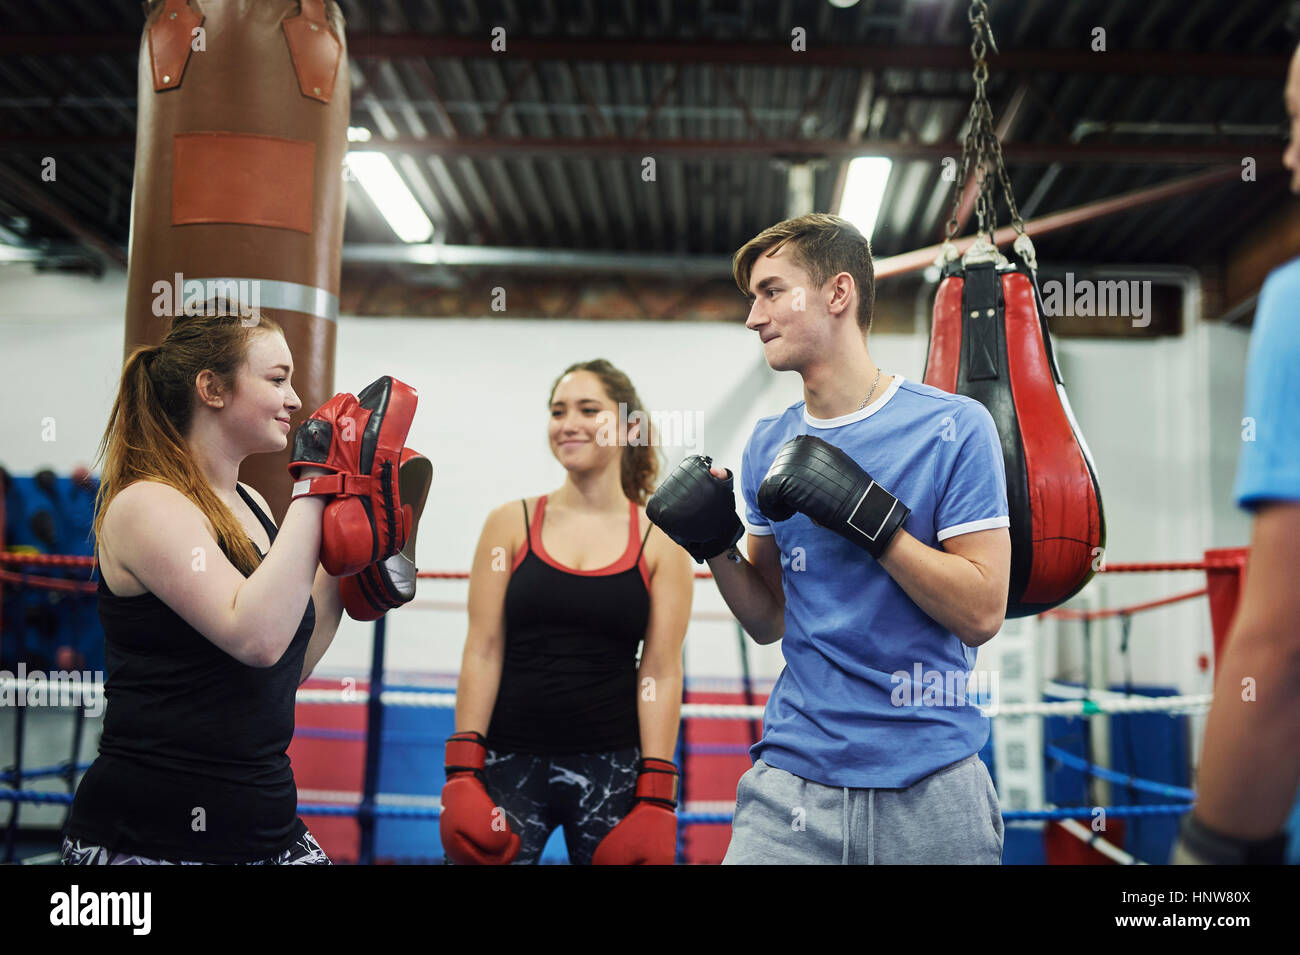 Male boxer training, poised to punch teammates punch mitt Stock Photo